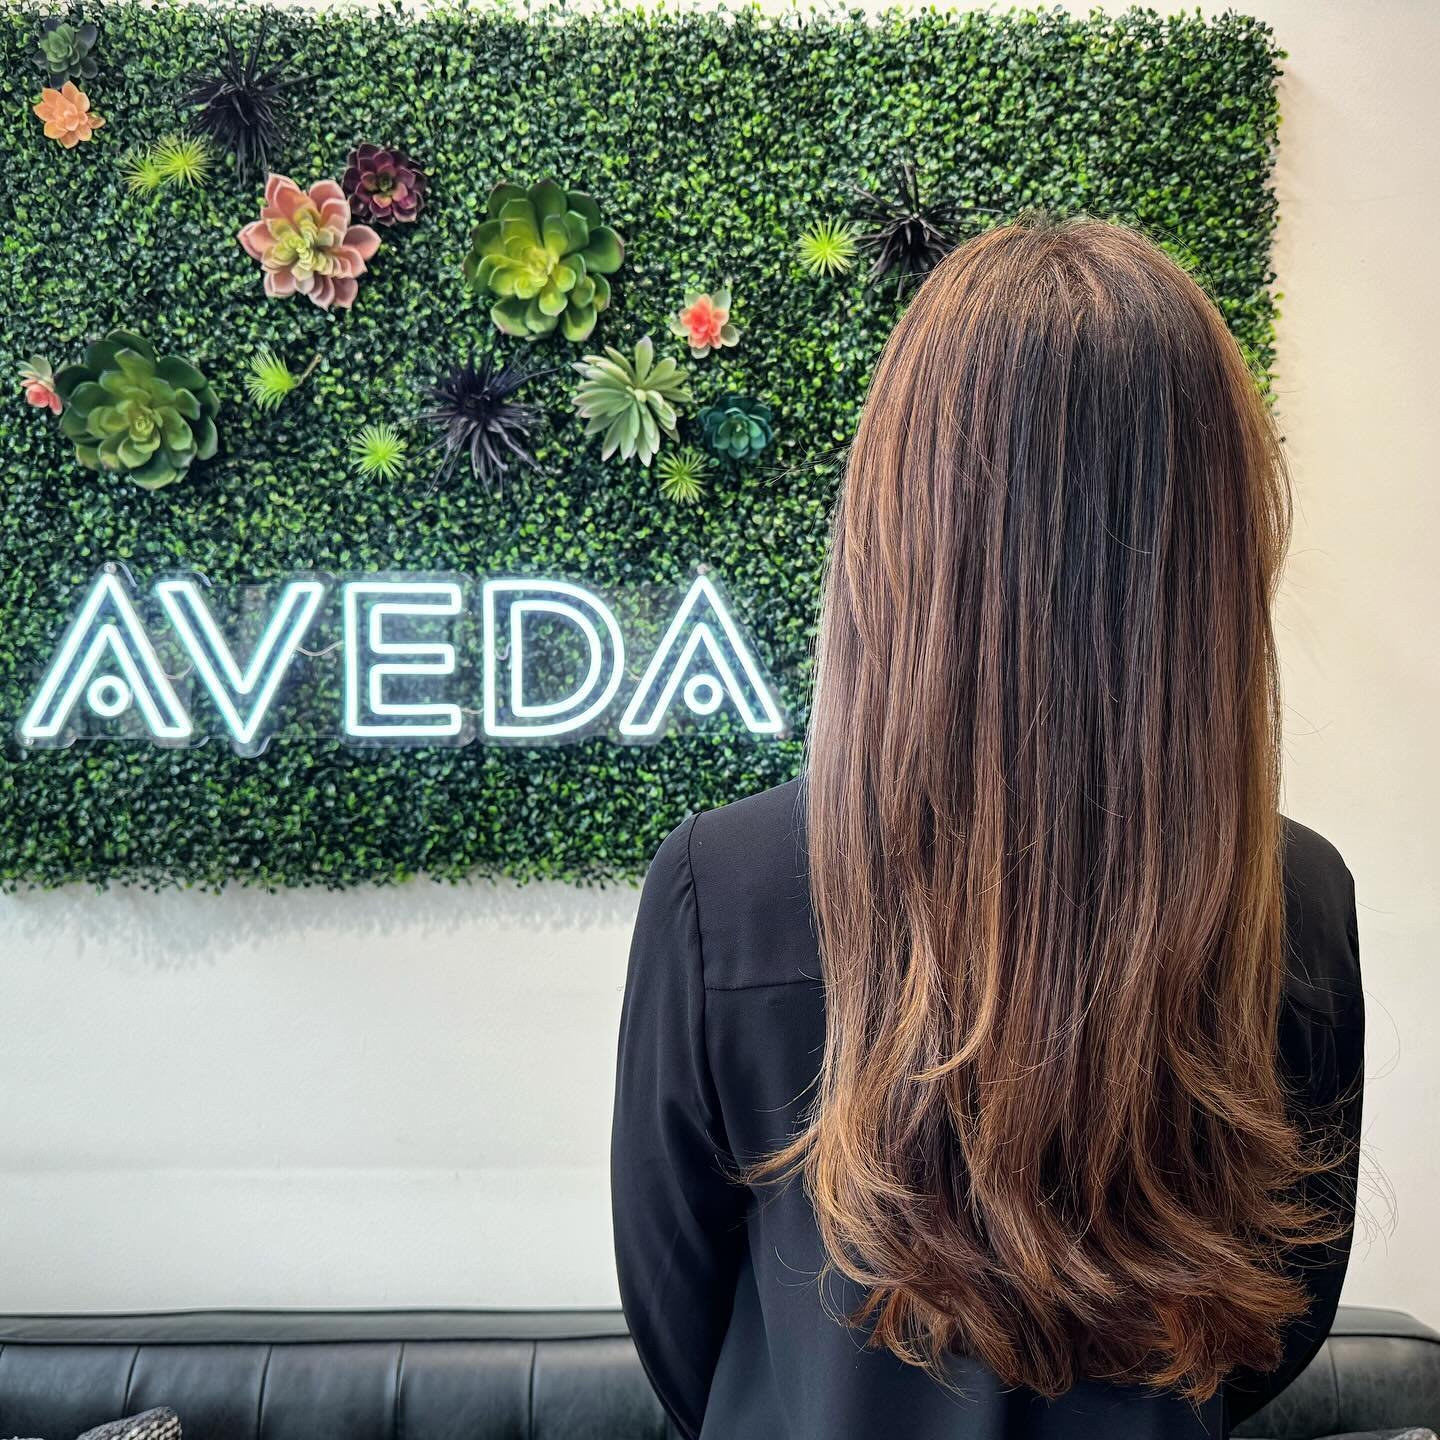 Beautiful dimensional color by @jknudsenhair. Thanks to Aveda Botanical Repair and their new Botanical Repair Flash Treatment! 🌿💫 Say goodbye to damage and hello to healthy, beautiful hair! 

#DimensionalColor #BotanicalRepair #avedatransformation